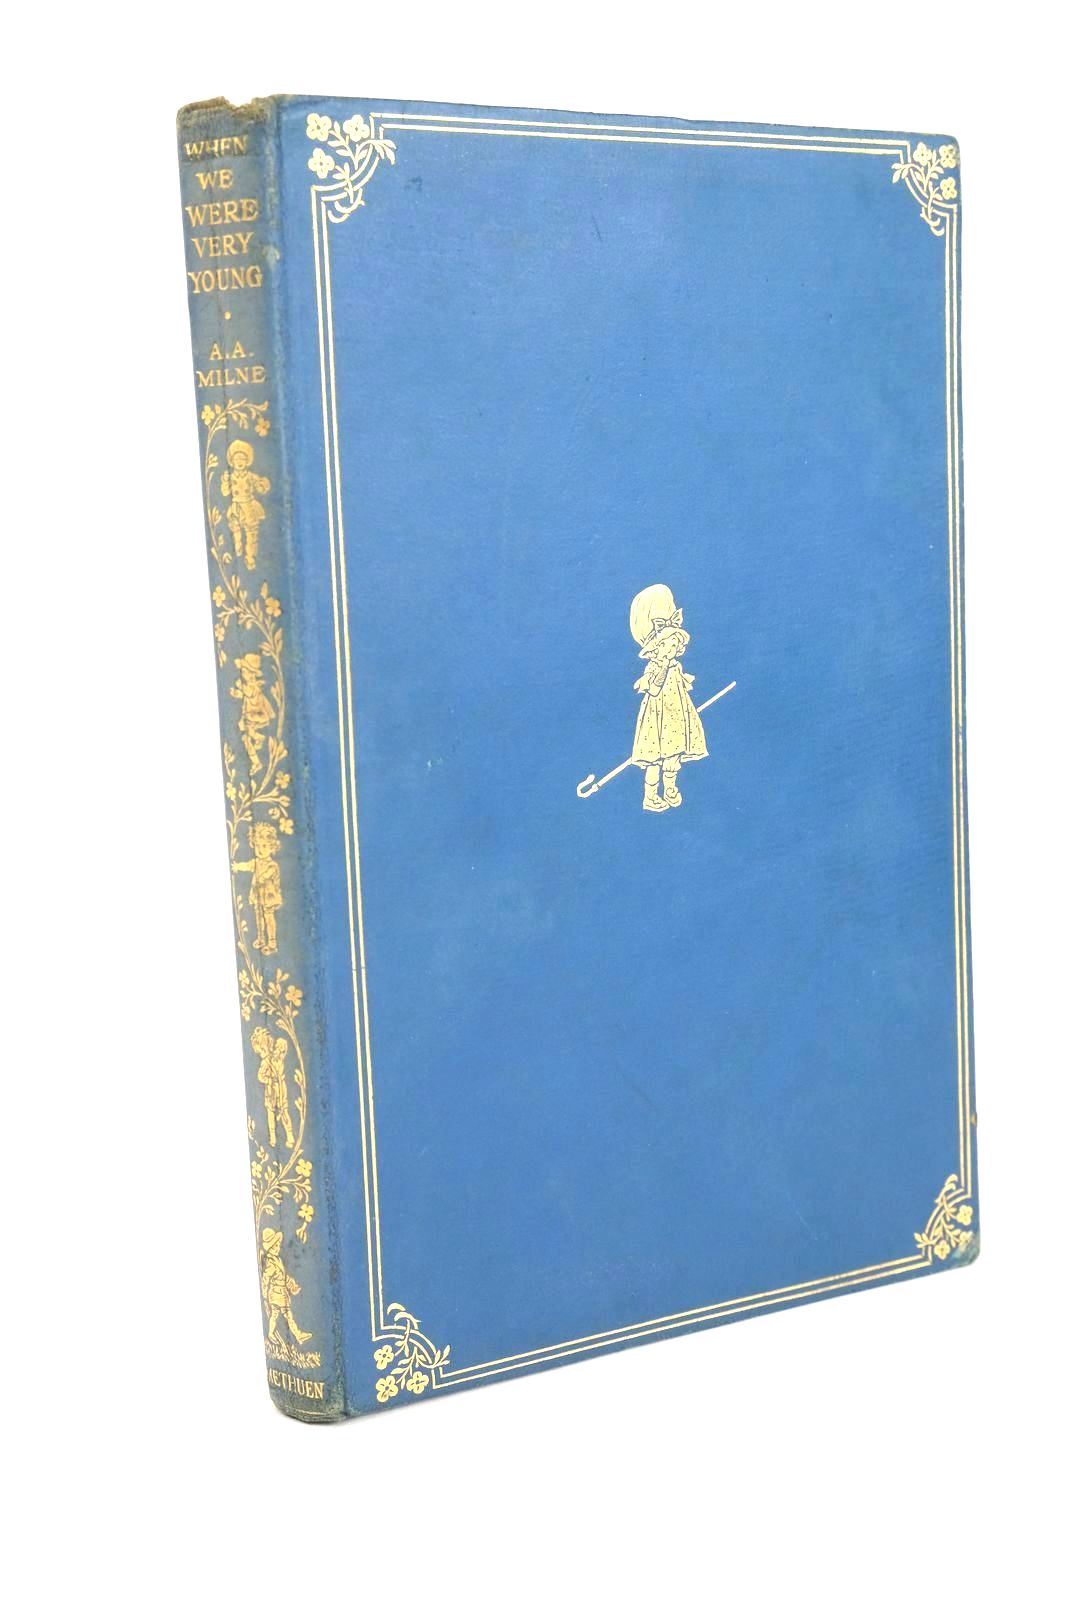 Photo of WHEN WE WERE VERY YOUNG written by Milne, A.A. illustrated by Shepard, E.H. published by Methuen &amp; Co. Ltd. (STOCK CODE: 1327885)  for sale by Stella & Rose's Books